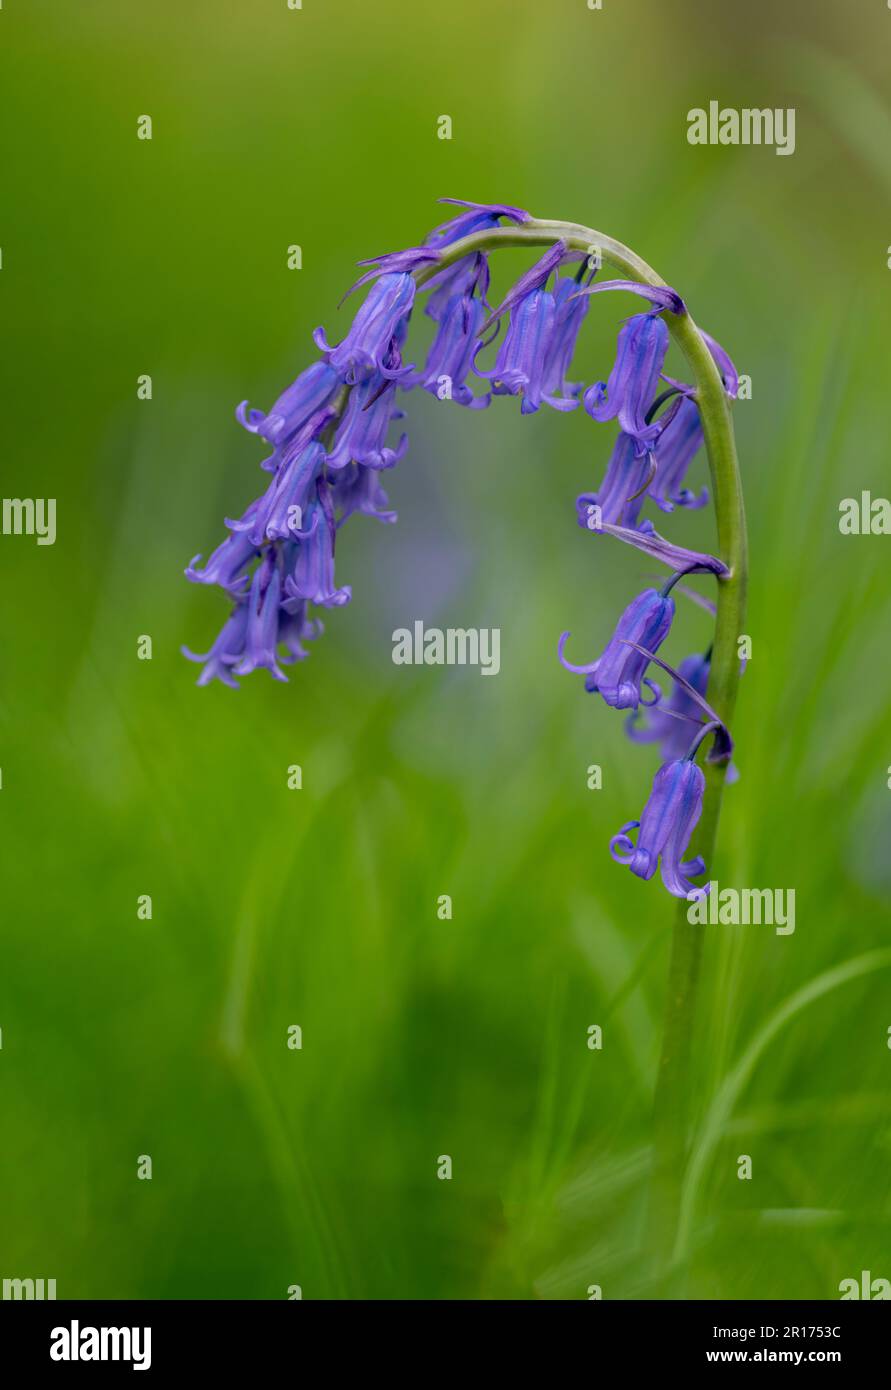 Beautiful fragrant Bluebell flowers, (Hyacinthoides non-scripta), photographed against a soft green background Stock Photo